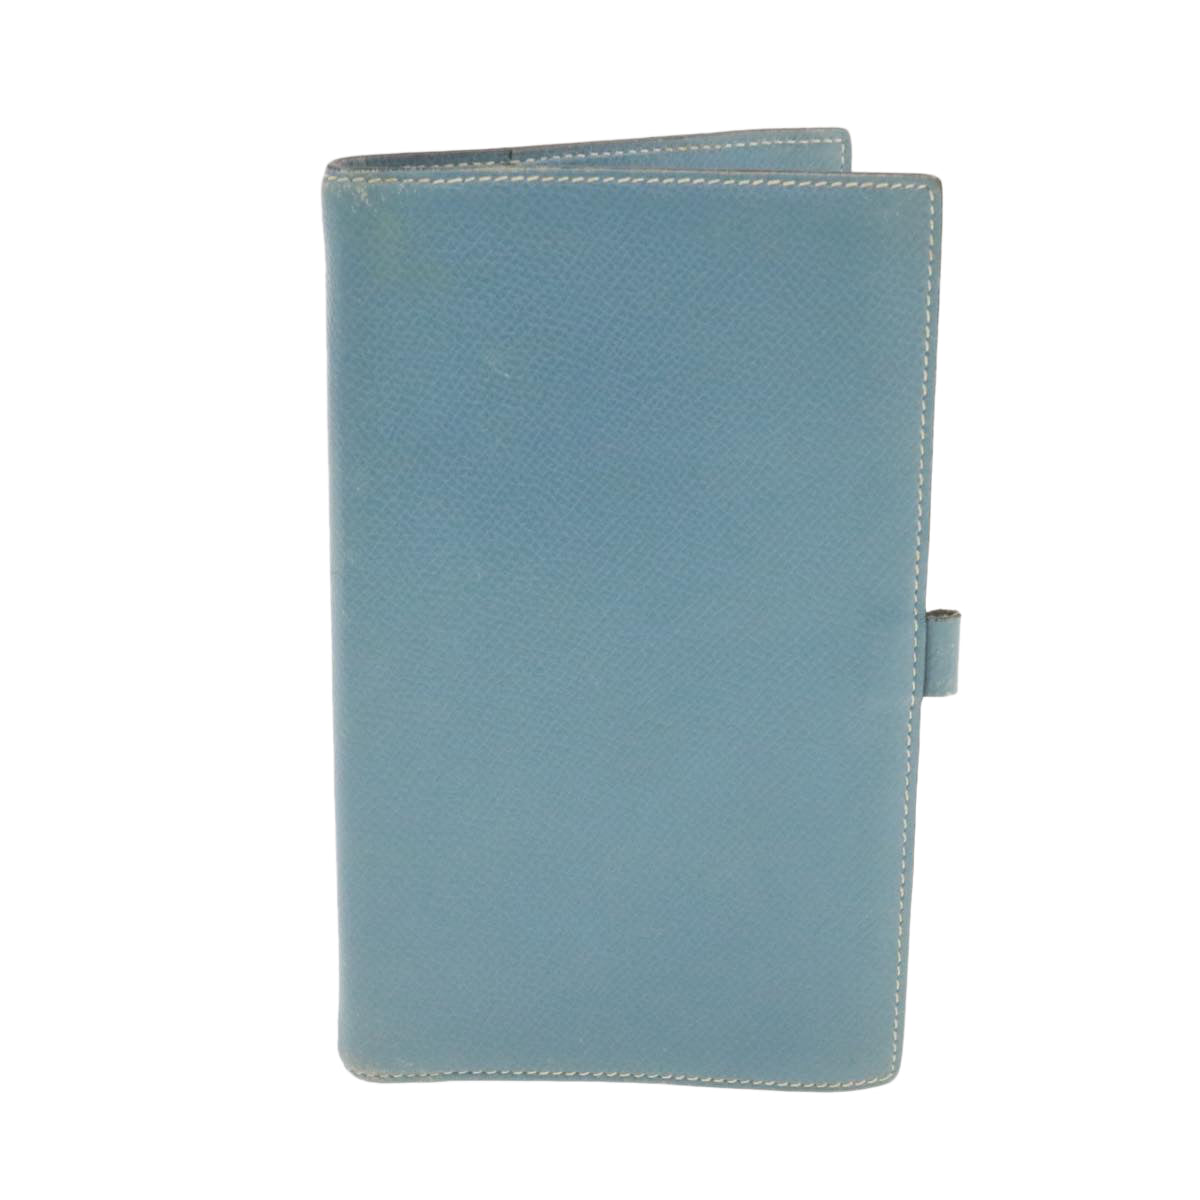 HERMES Agenda PM Day Planner Cover Leather Light Blue Auth ar3414 - 0